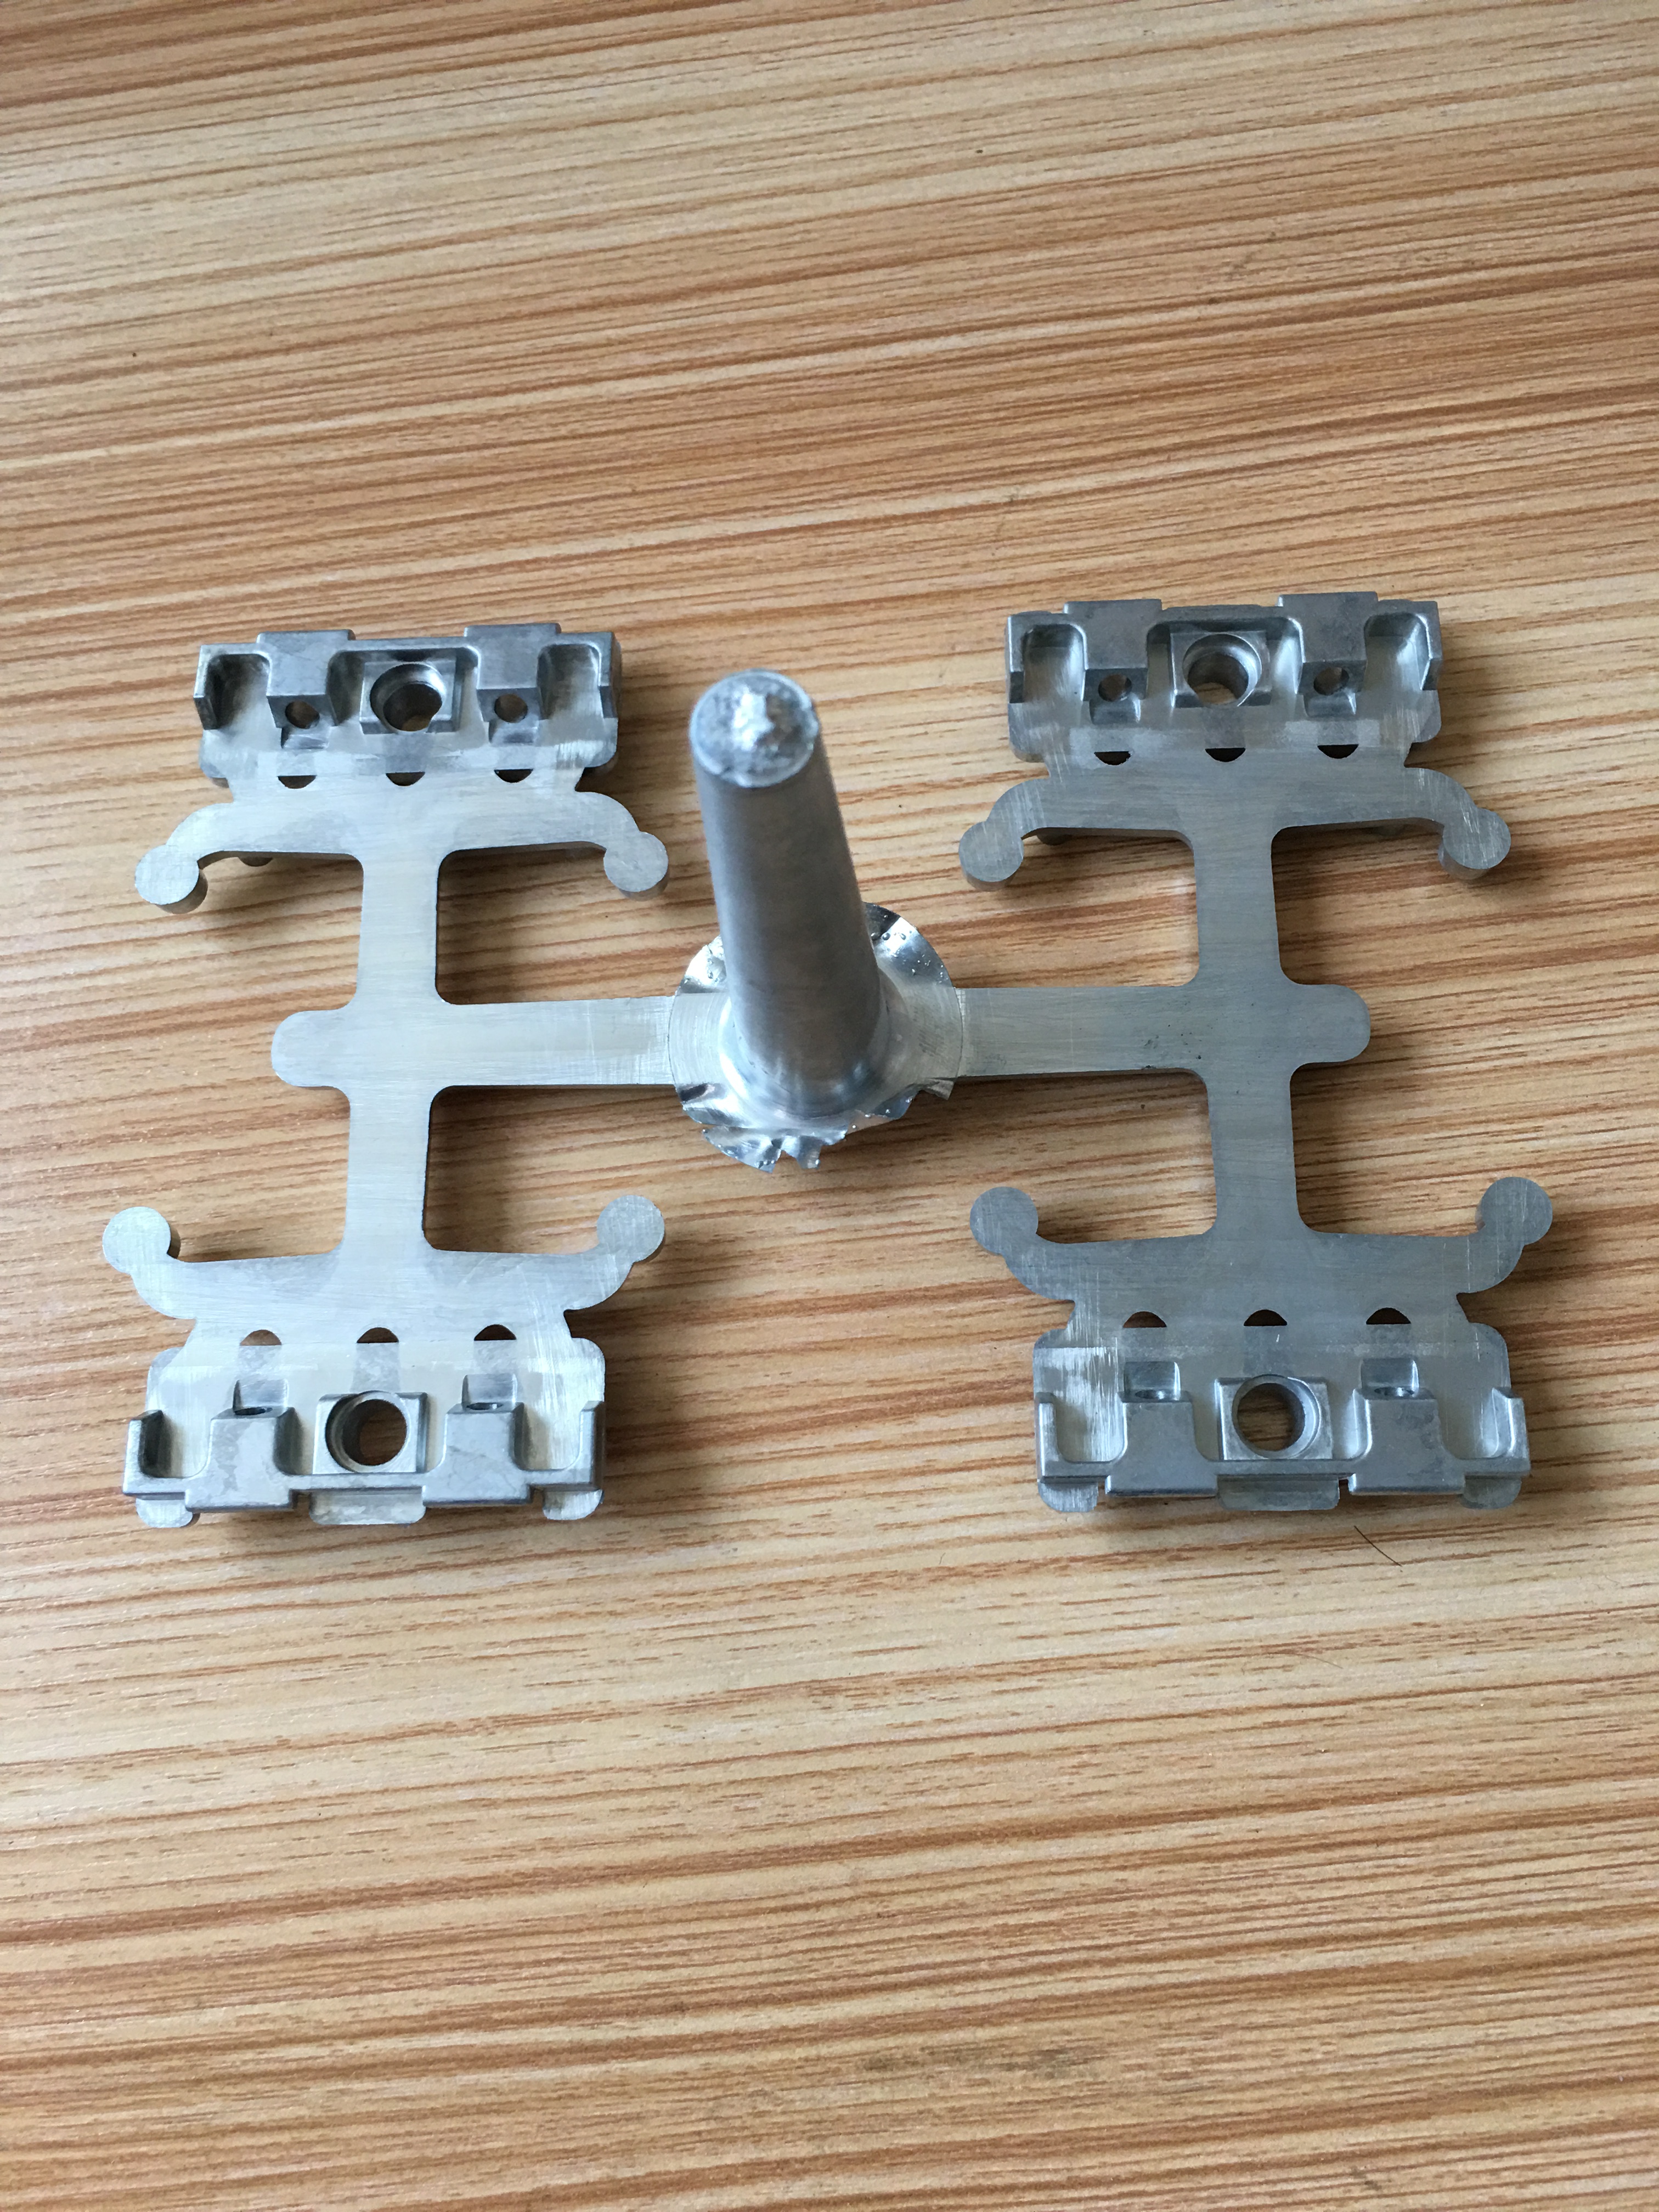 Can plastic injection mold of washing machine supplier produce large quantities of molds?